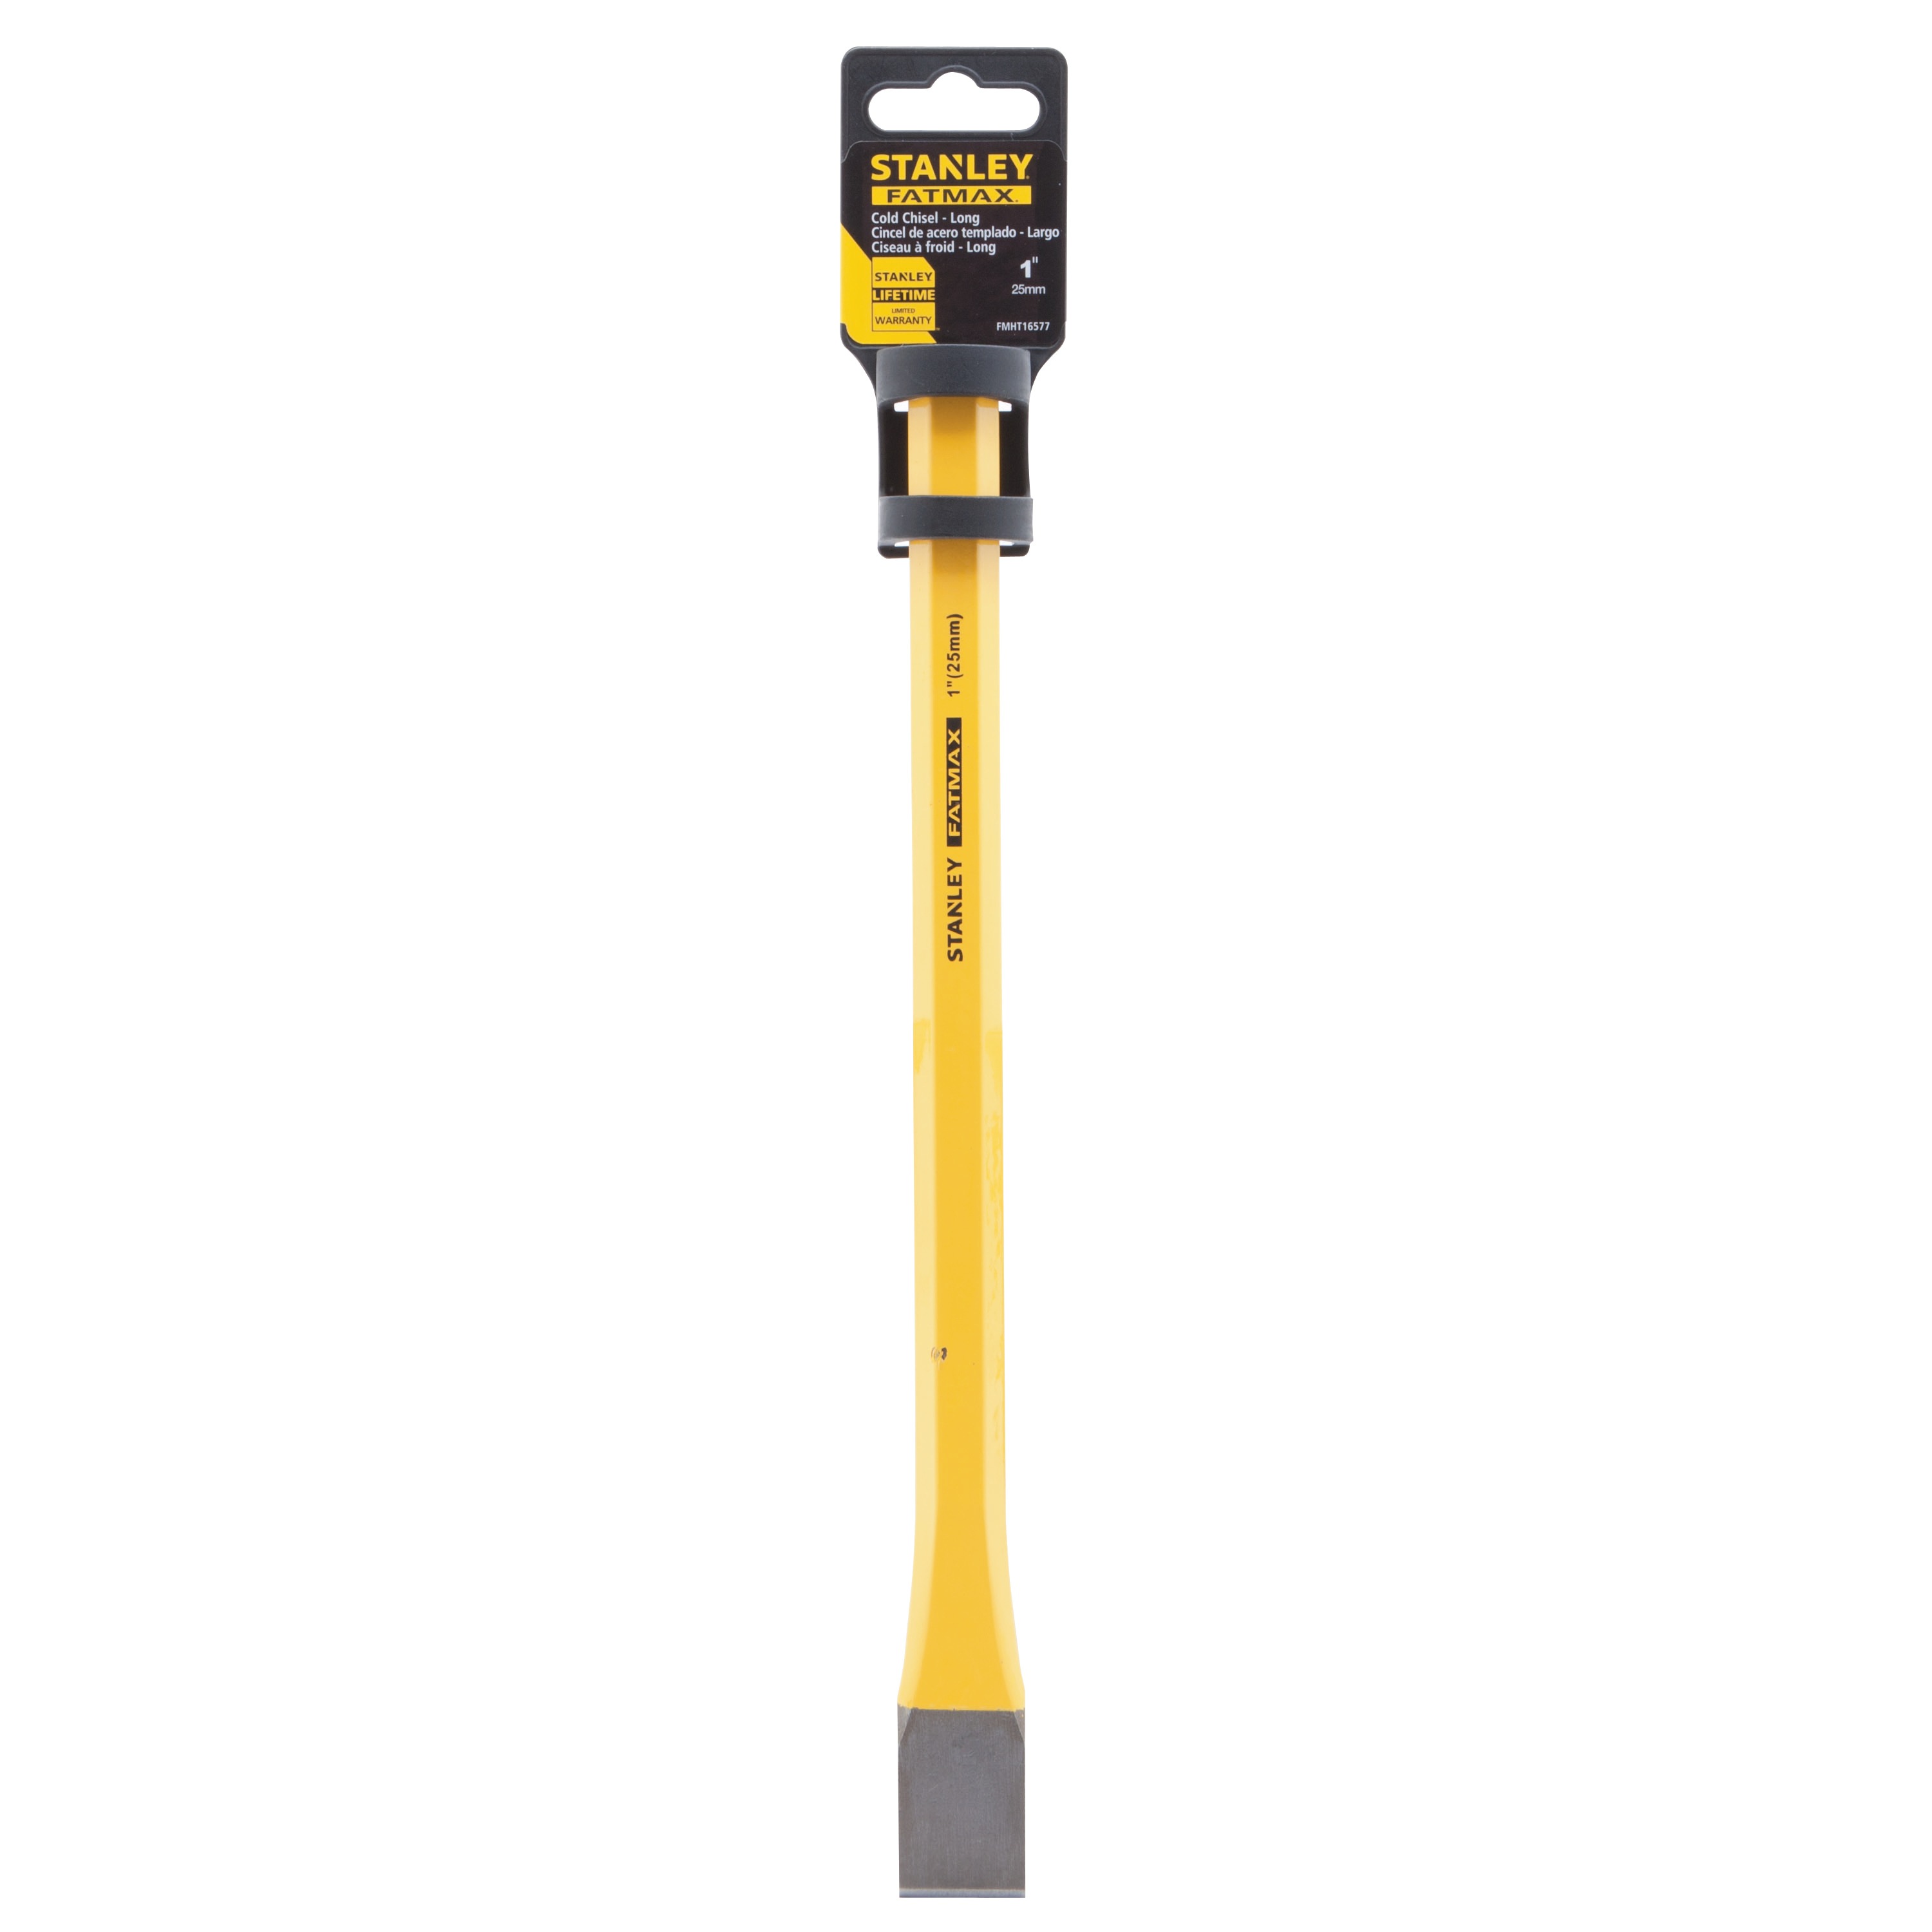 Stanley Tools - 1 in FATMAX Cold Chisel - FMHT16577